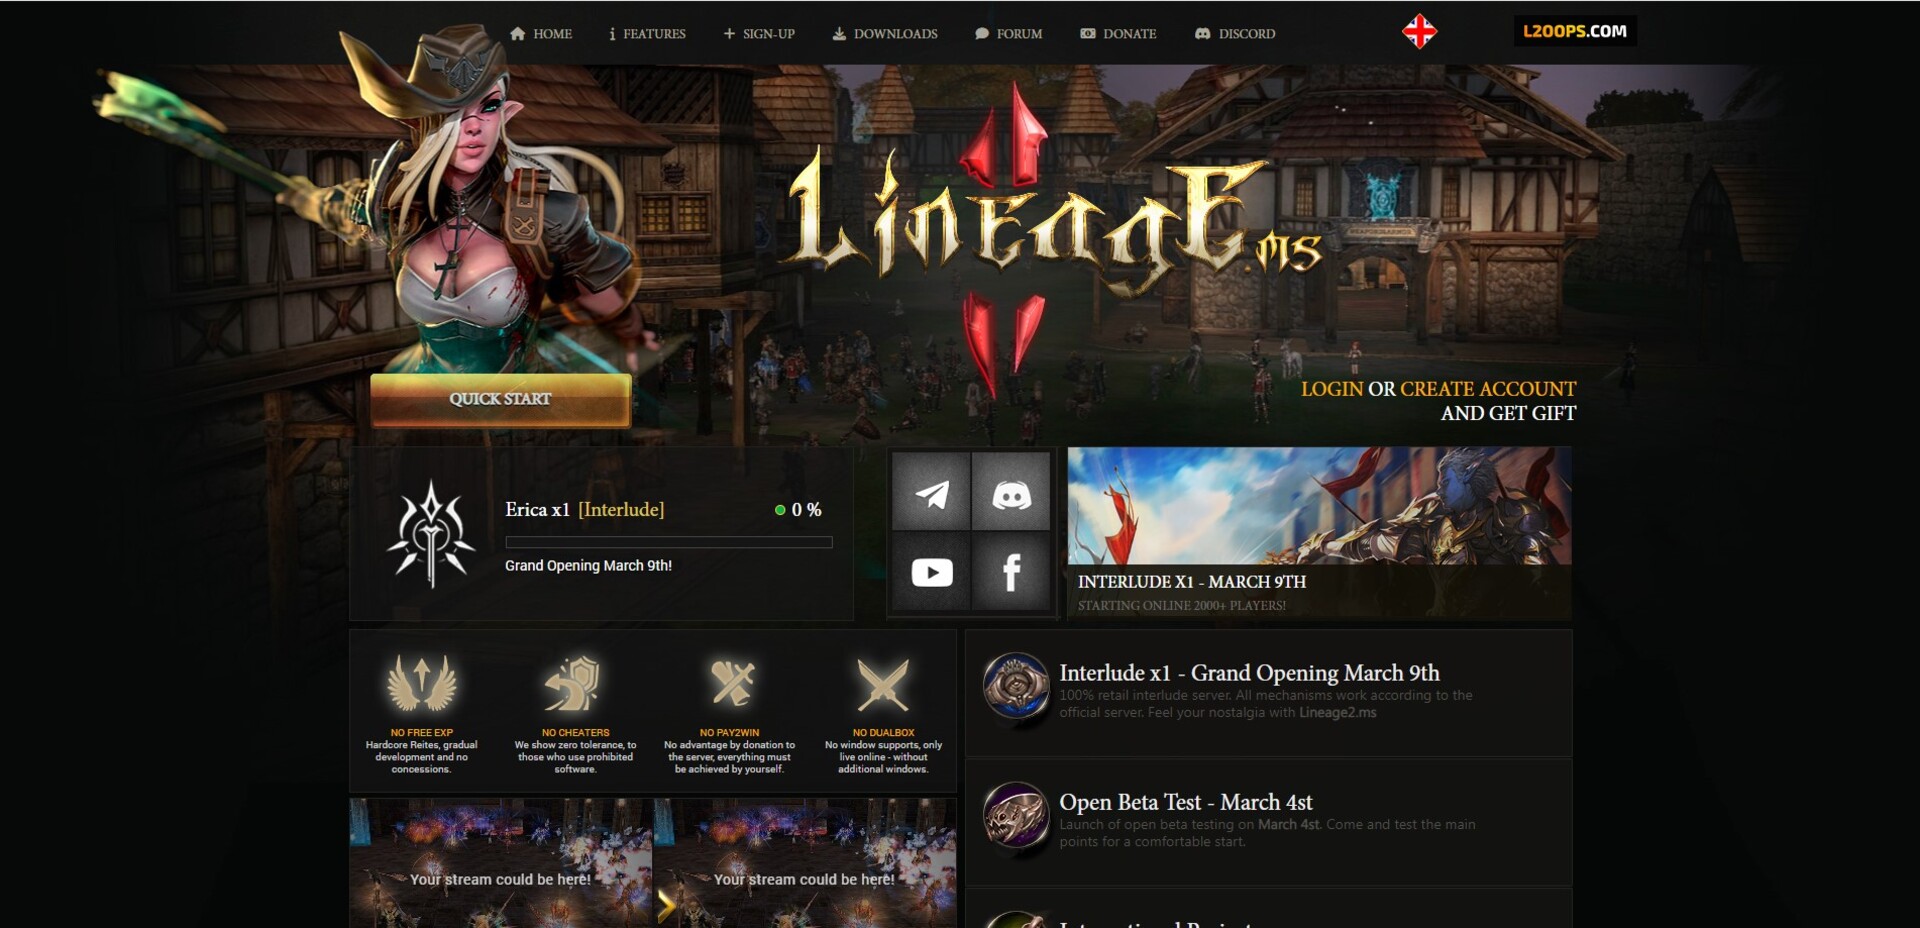 🏰✨ Welcome to the world of Lineage 2 with endless adventures on the Lineage2.ms server! ✨🏰